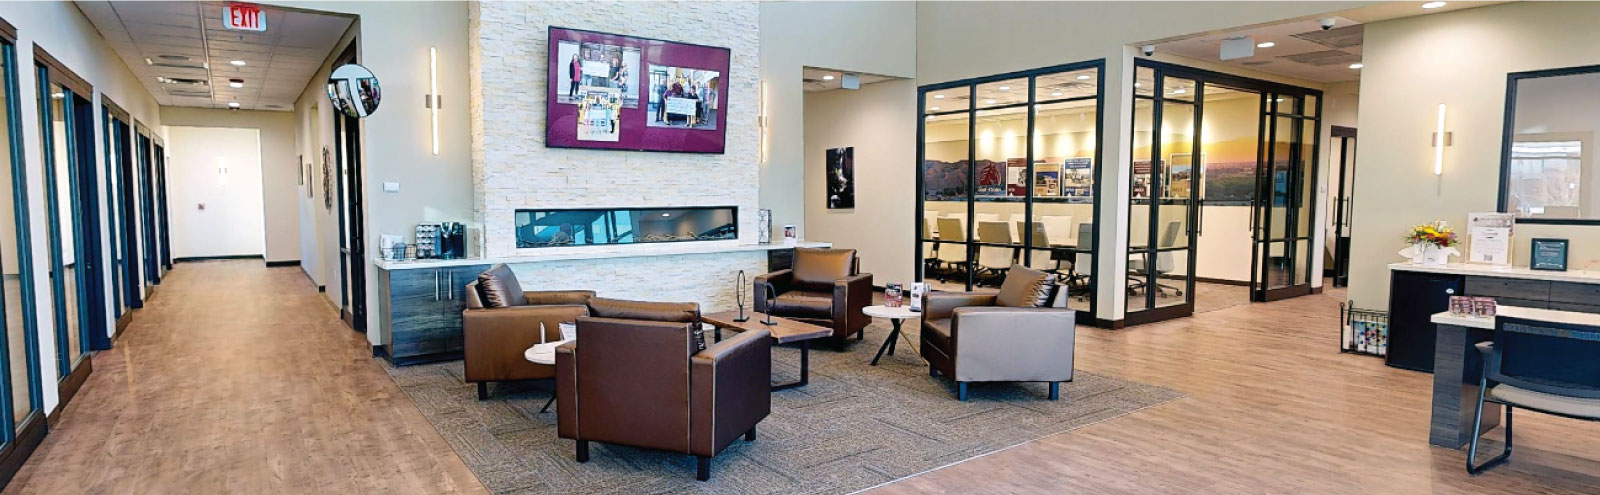 Waiting area at the Billings branch